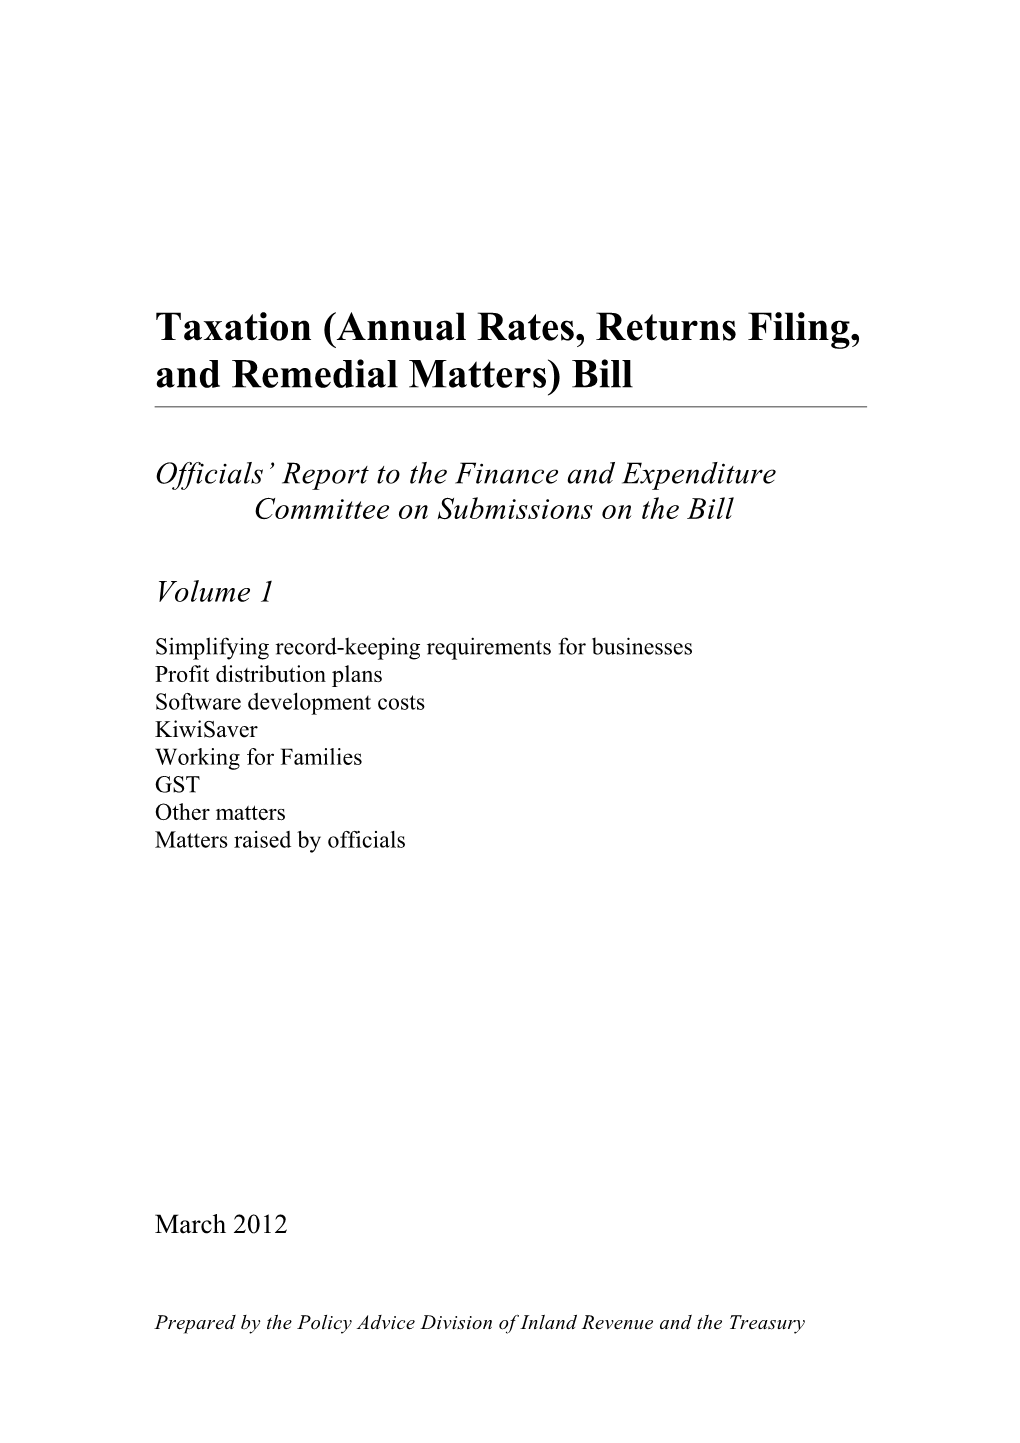 Taxation (Annual Rates, Returns Filing, and Remedial Matters) Bill - Volume 1